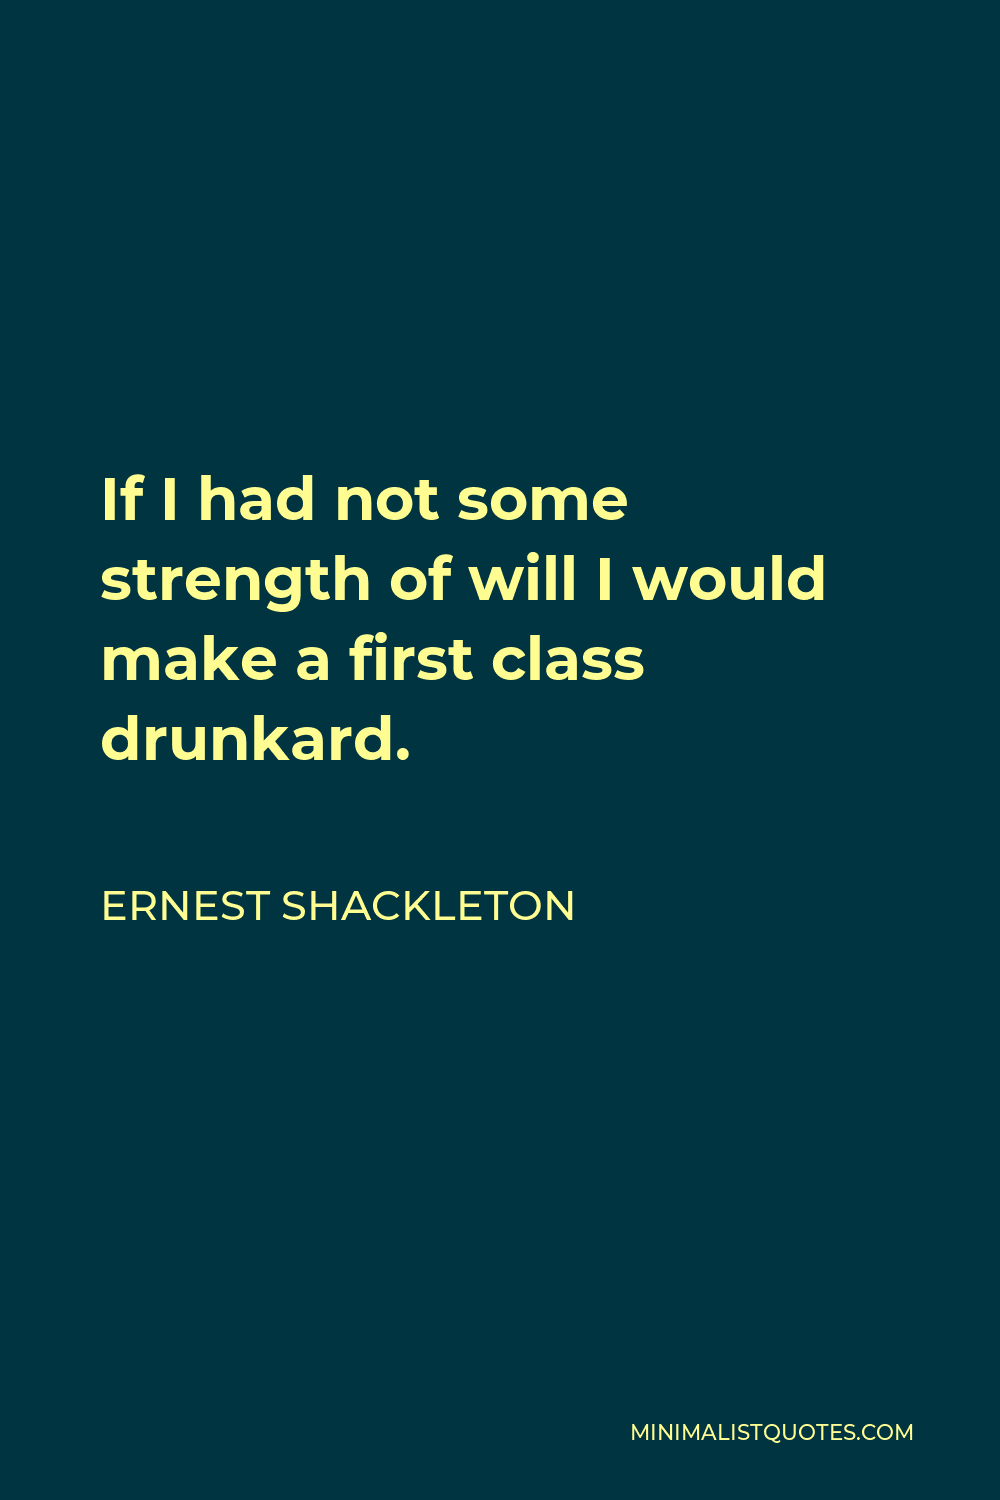 Ernest Shackleton Quote - If I had not some strength of will I would make a first class drunkard.